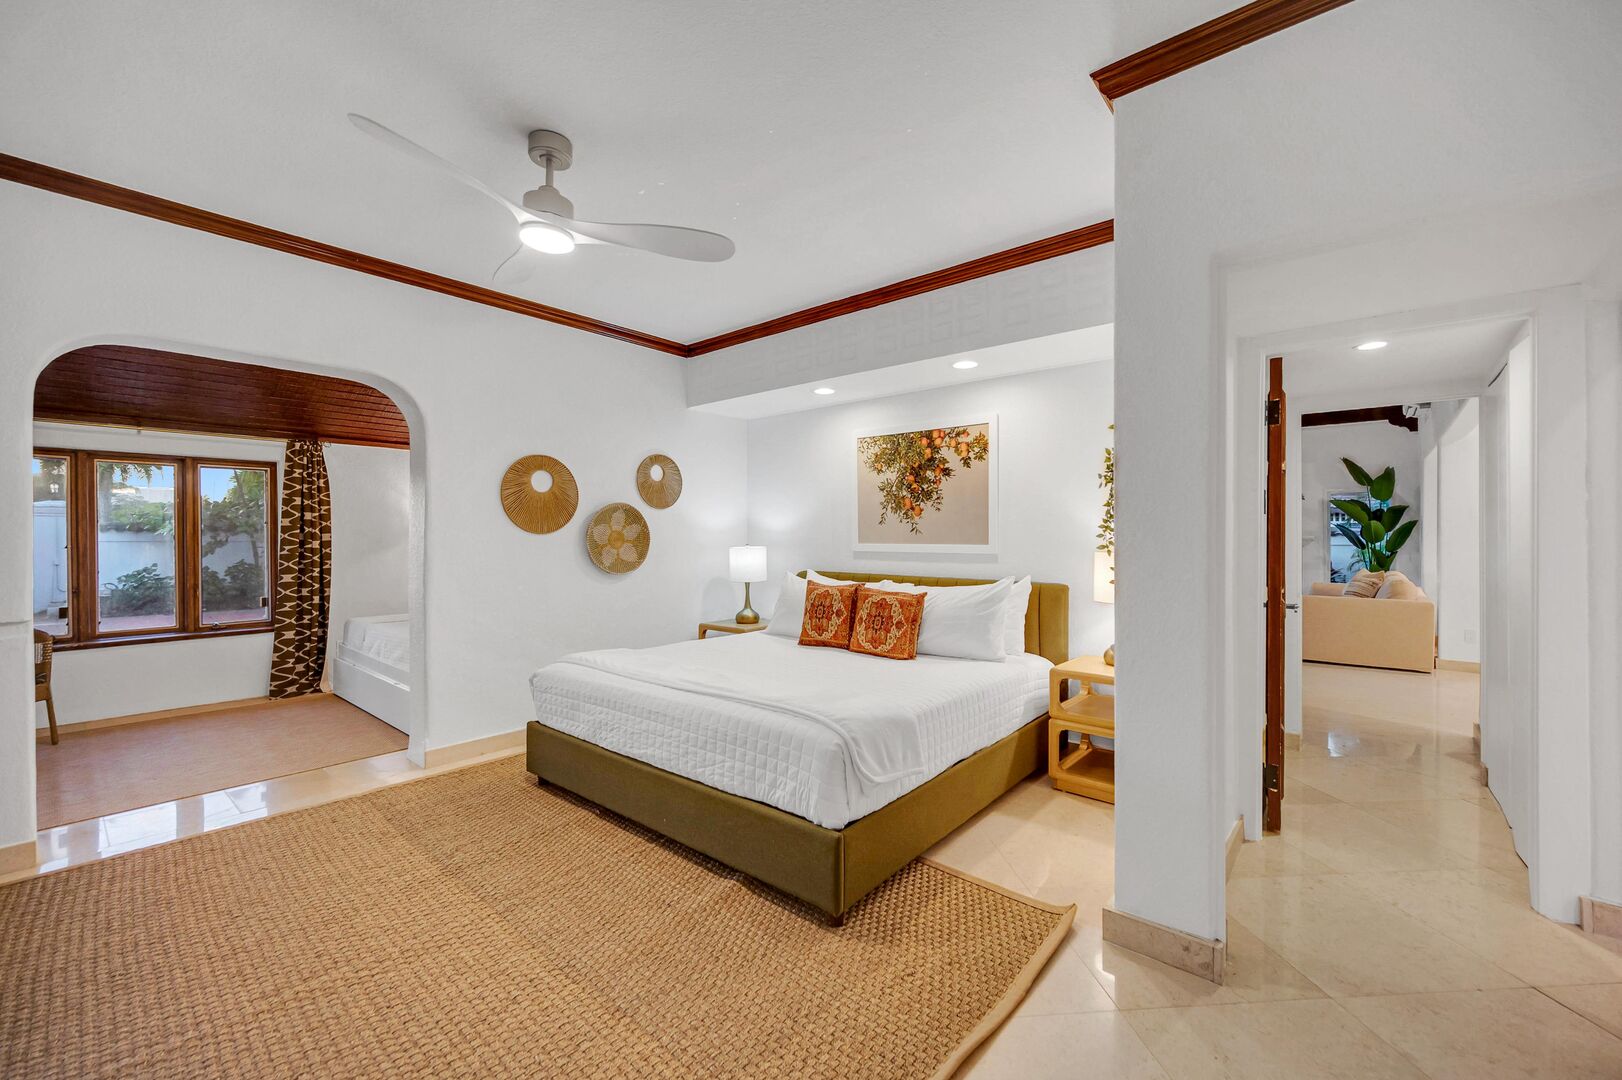 The primary bedroom is located on the ground floor and features one king size and two twin beds.